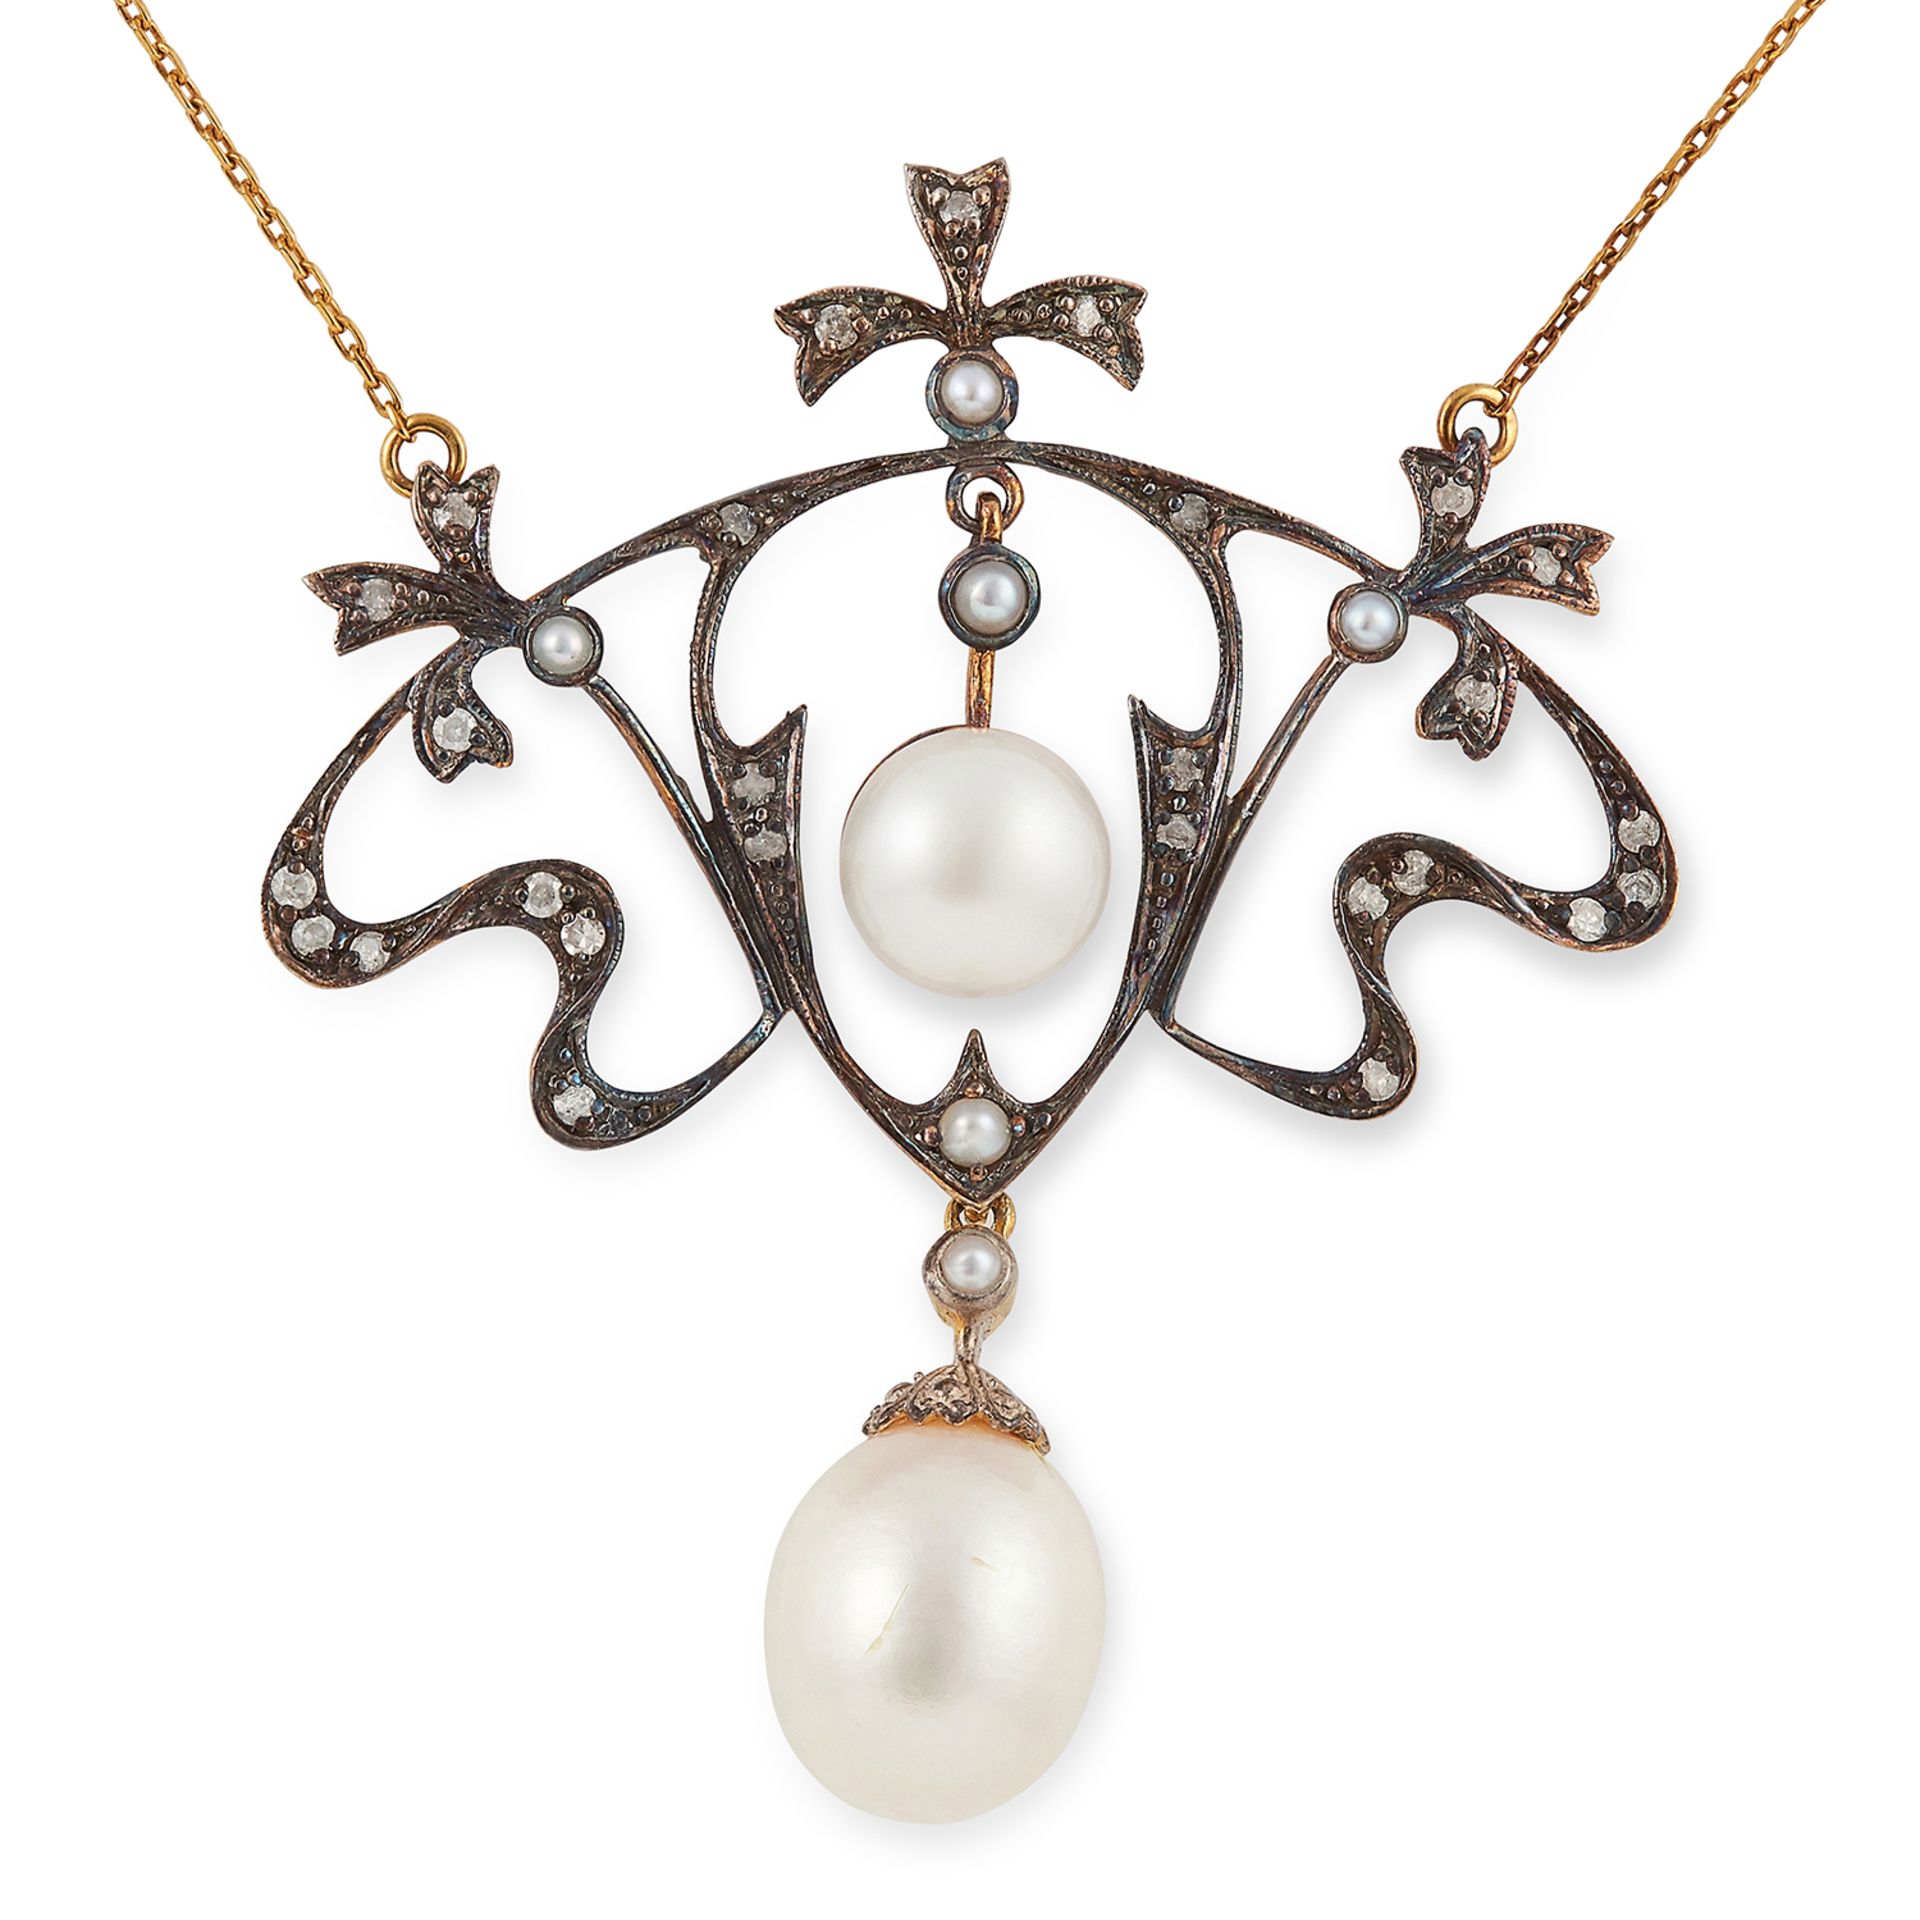 PEARL AND DIAMOND NECKLACE, in foliate design set with round cut diamonds, seed pearls and pearls,